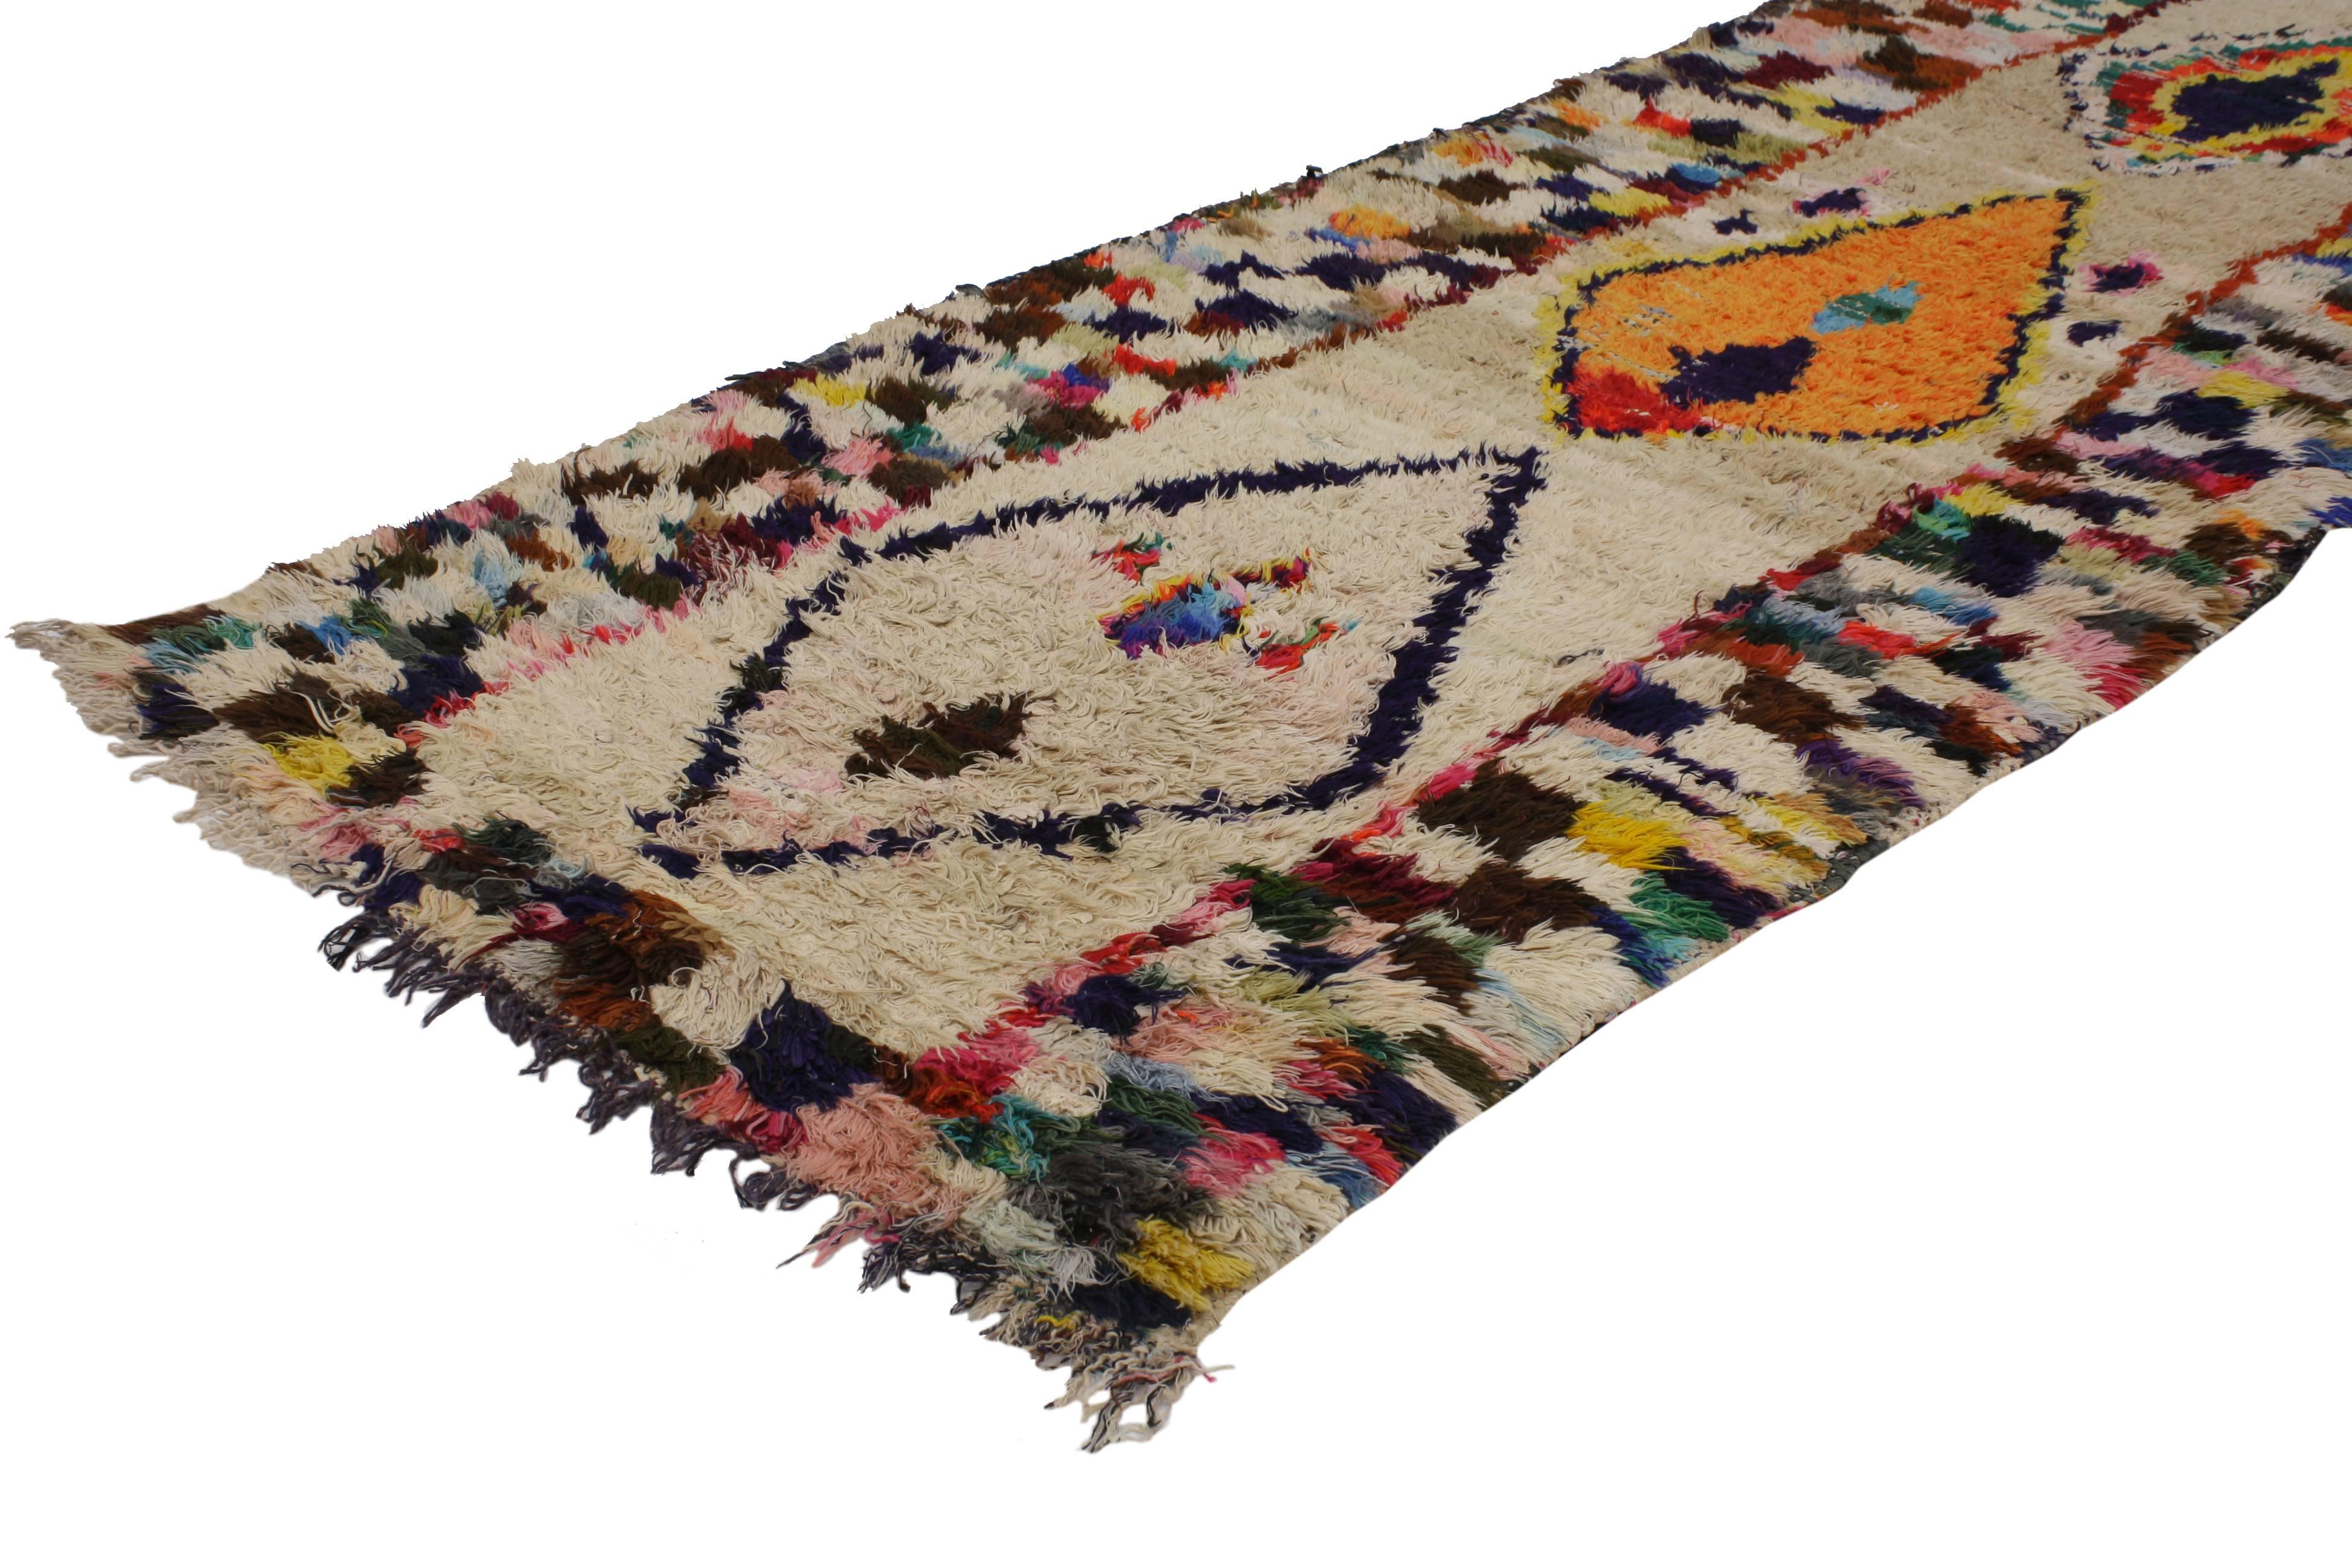 With its Primitive charm and boho chic style, this vintage Berber Moroccan runner with modern tribal design conveys a sense of beauty and mystery. Impeccably woven from hand-knotted wool in vibrant colors, this Moroccan rug runner does an excellent